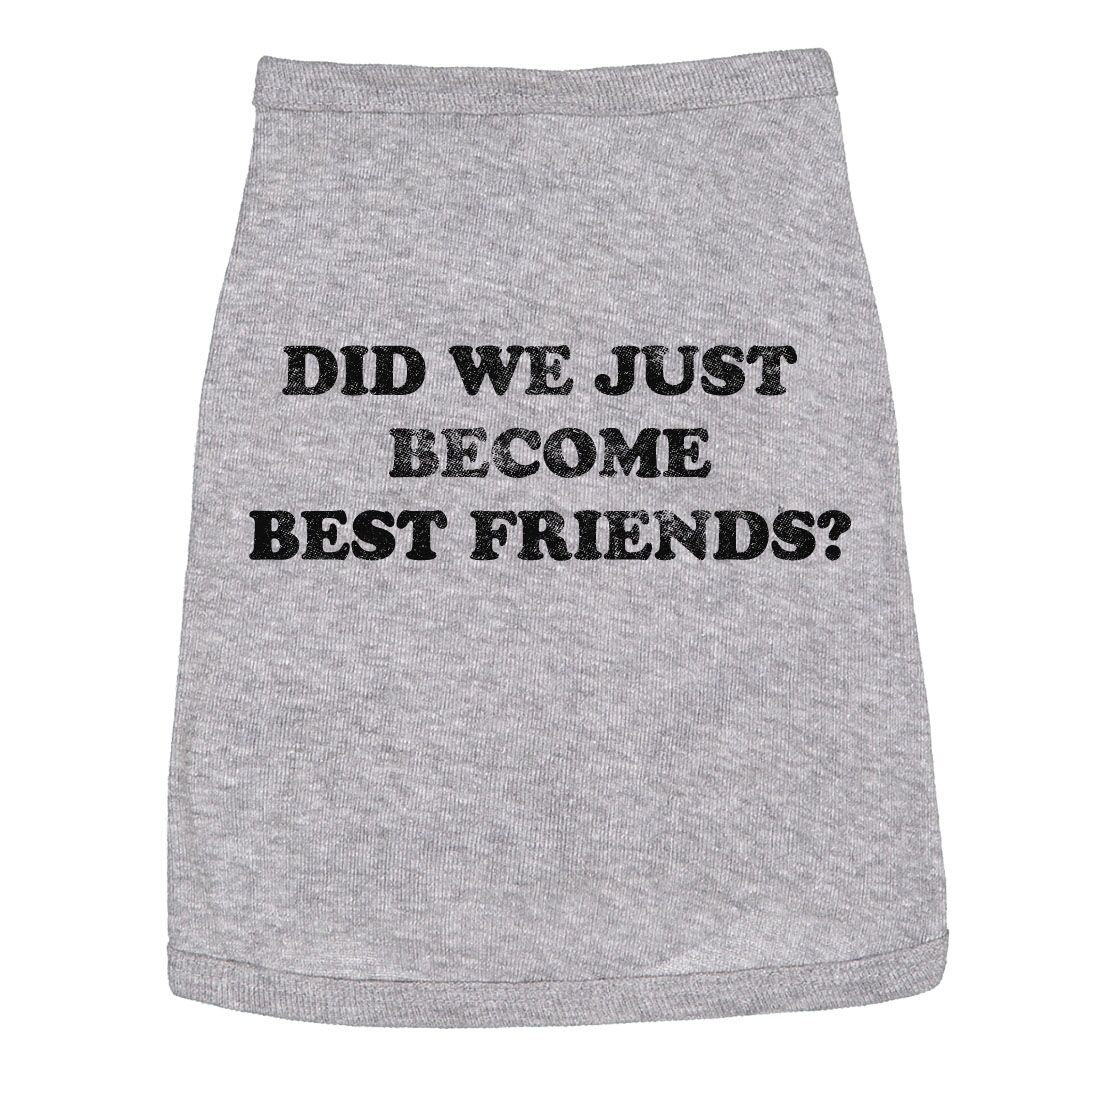 funny dog t shirt sayings for dogs